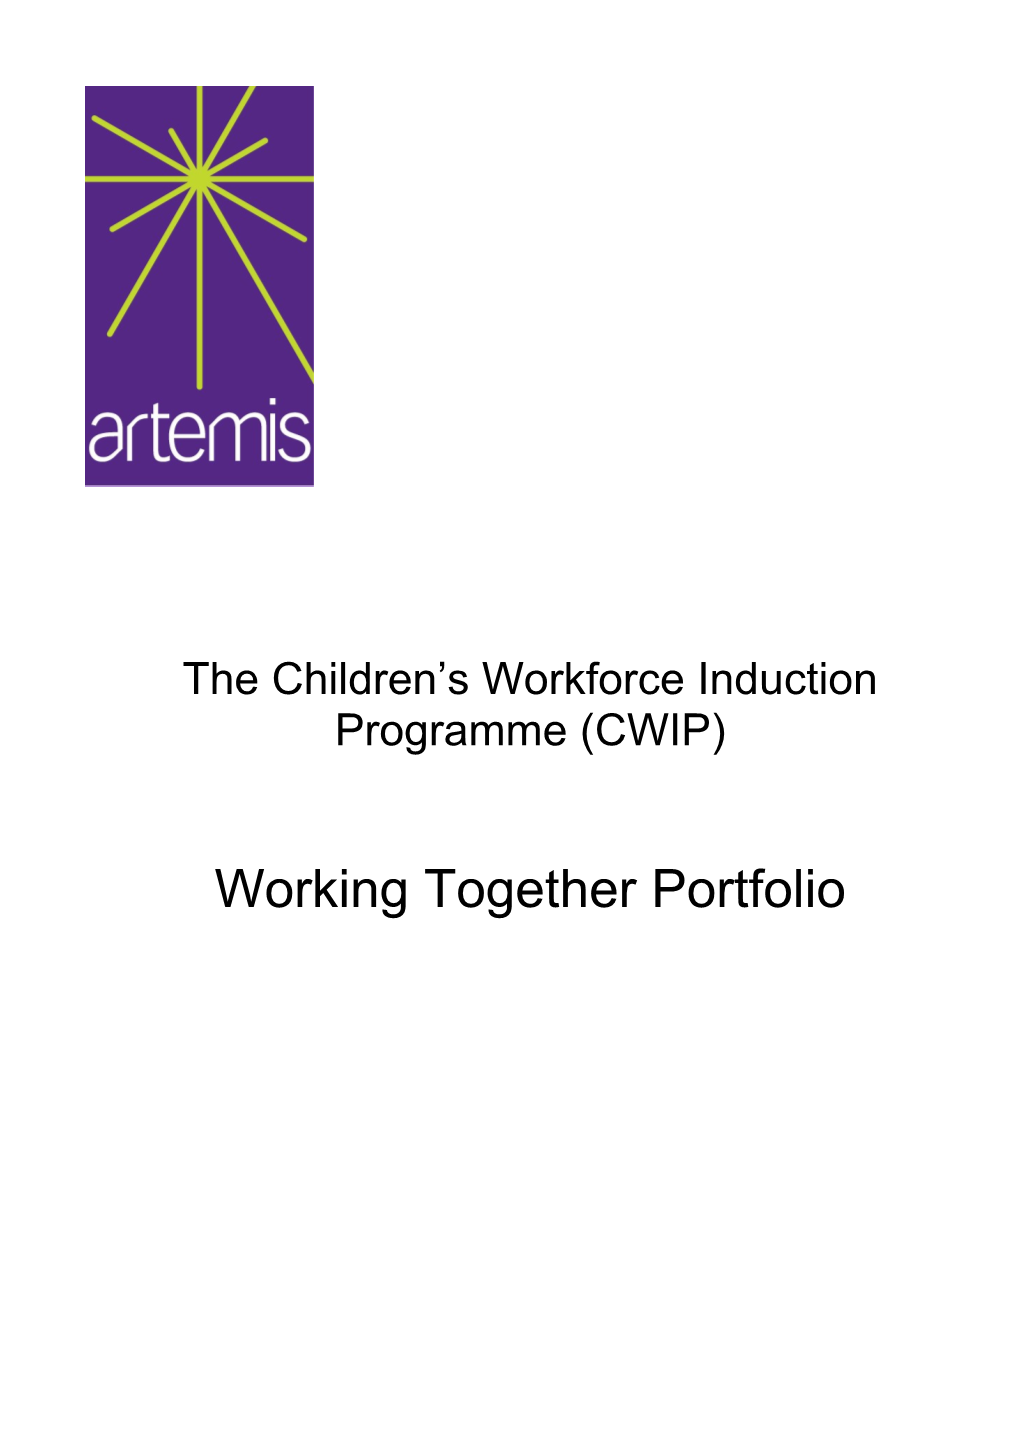 The Children S Workforce Induction Programme (CWIP)